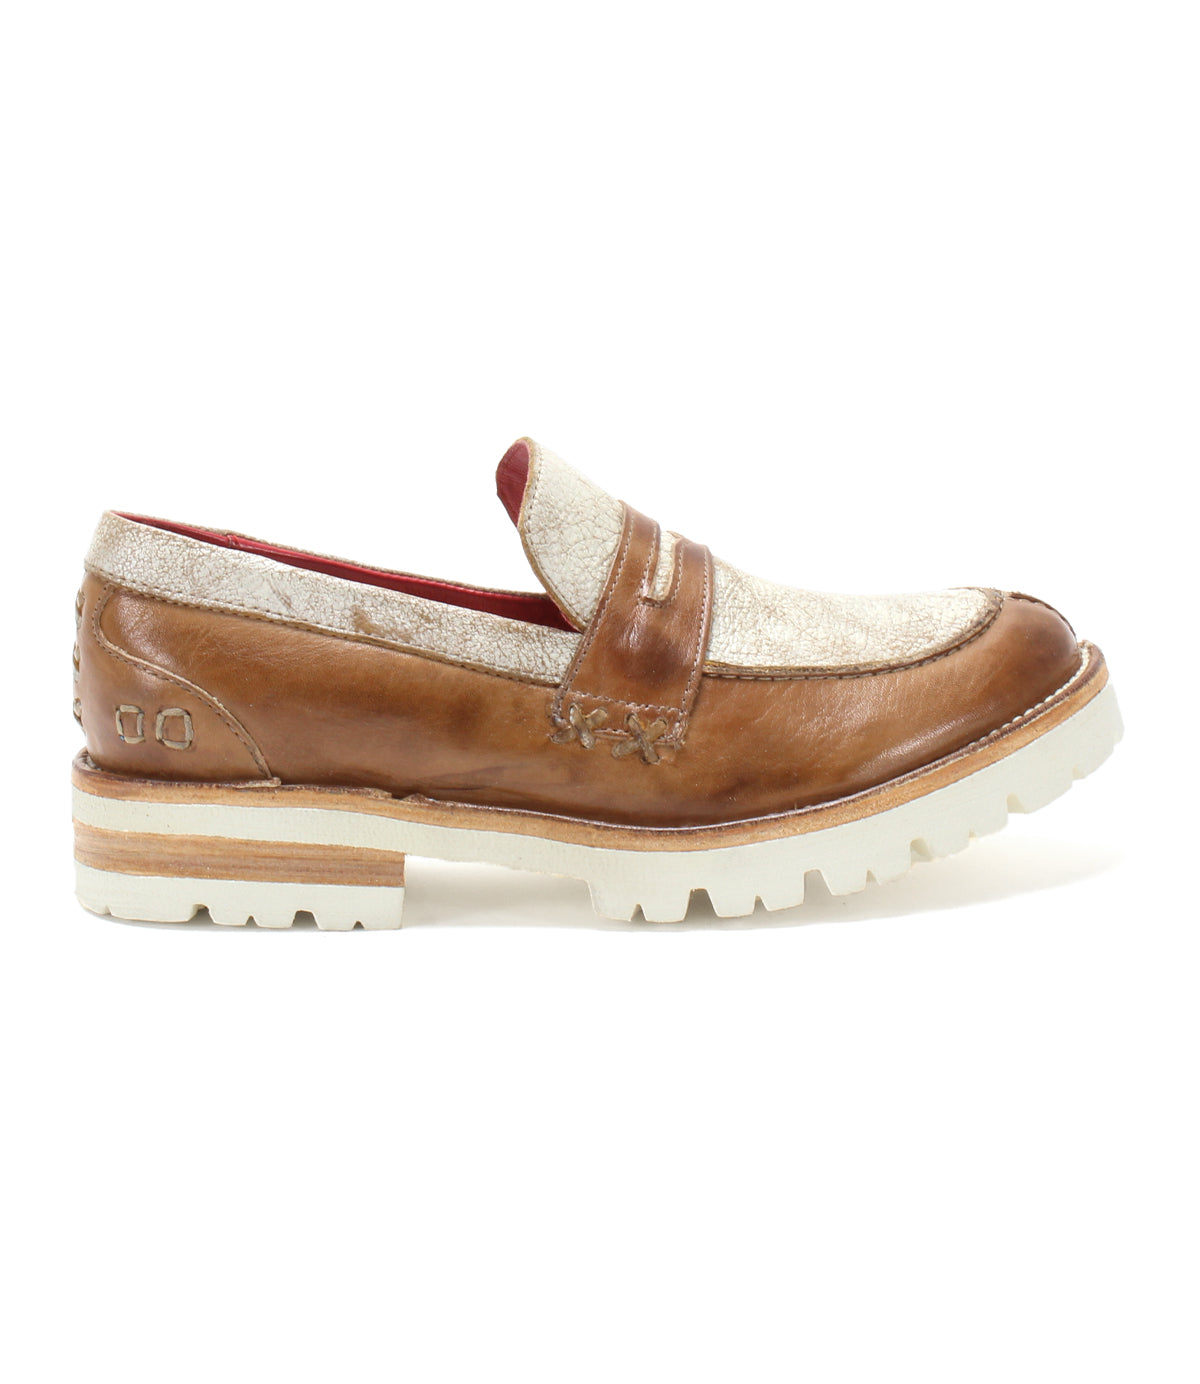 The Bed Stu Reina III is a leather penny loafer for men, featuring tan and white soles and providing all-day comfort.